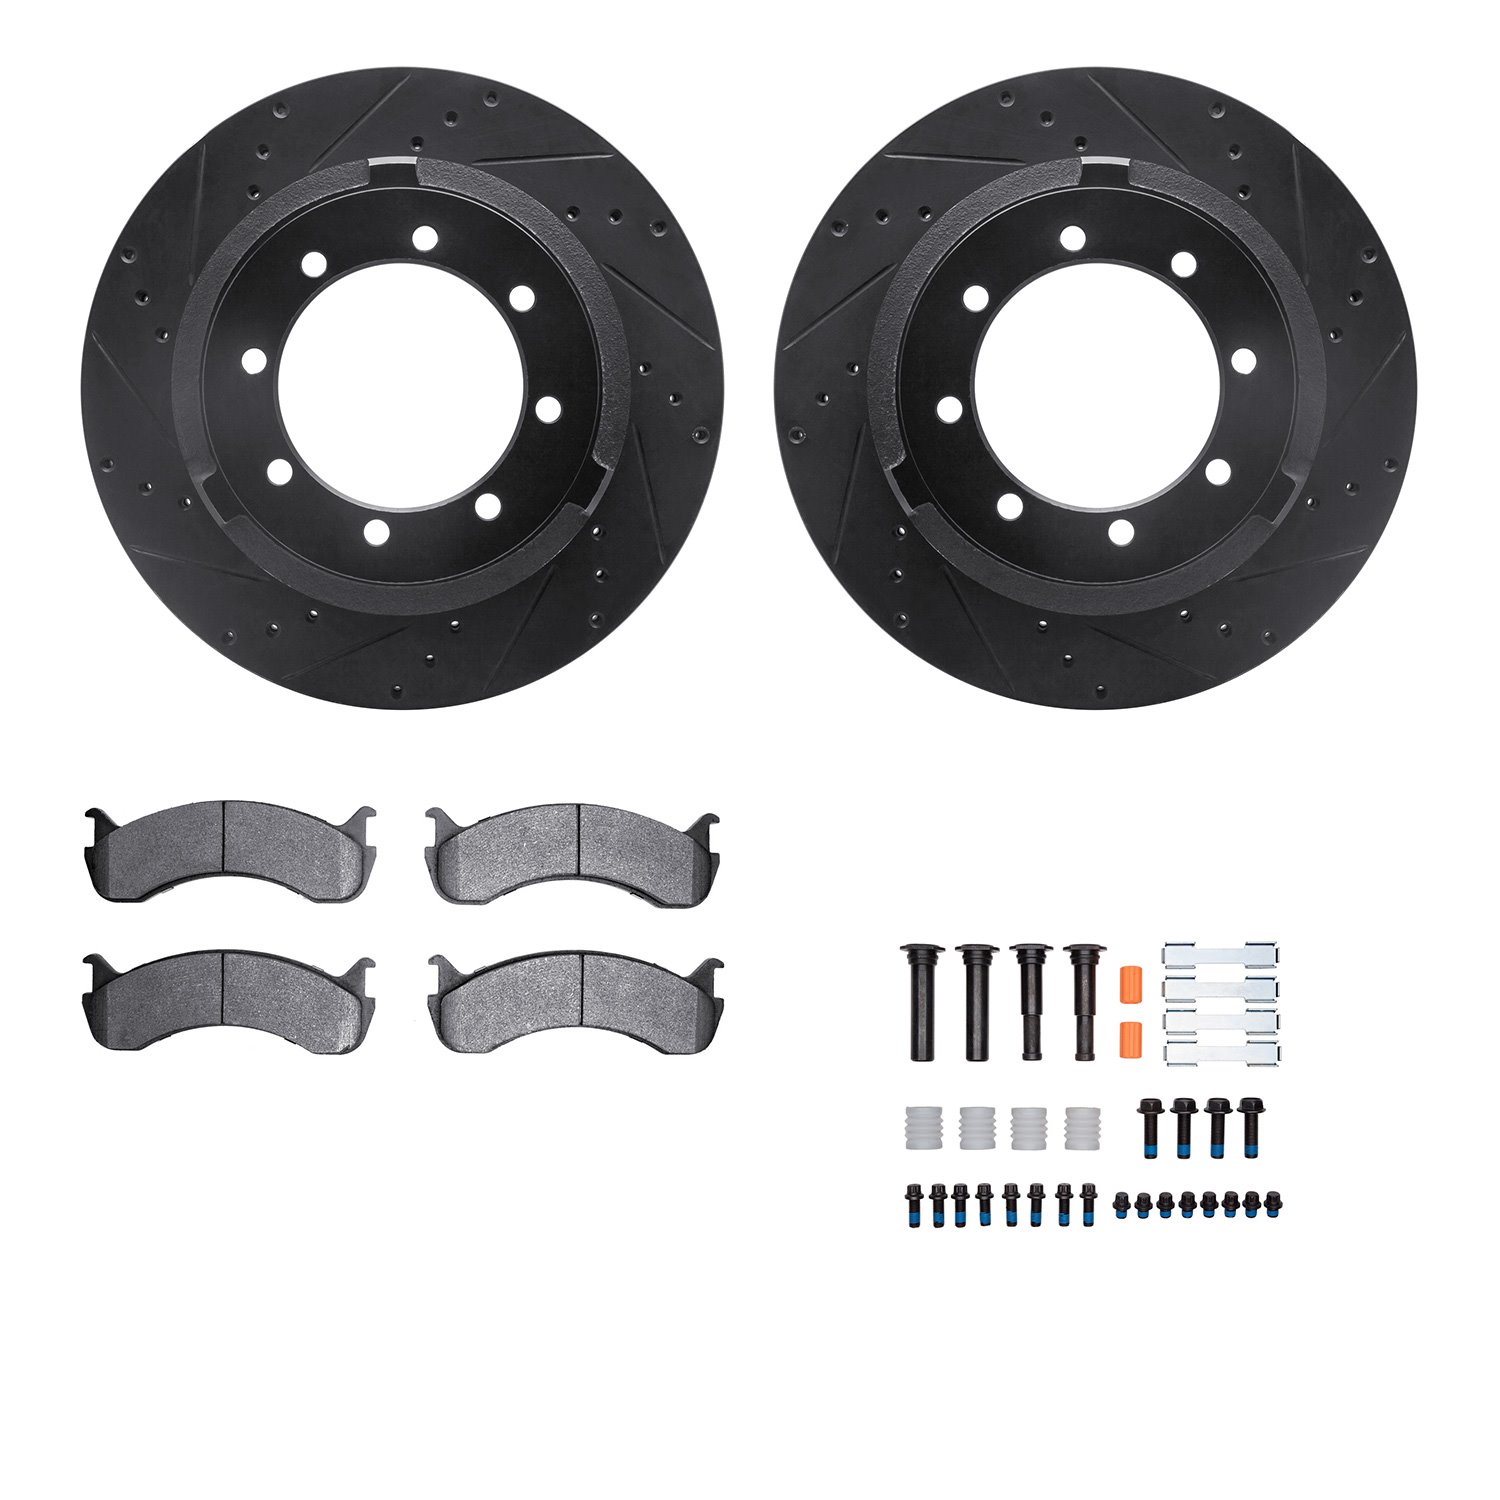 8212-99256 Drilled/Slotted Rotors w/Heavy-Duty Brake Pads Kit & Hardware [Black], Fits Select Ford/Lincoln/Mercury/Mazda, Positi